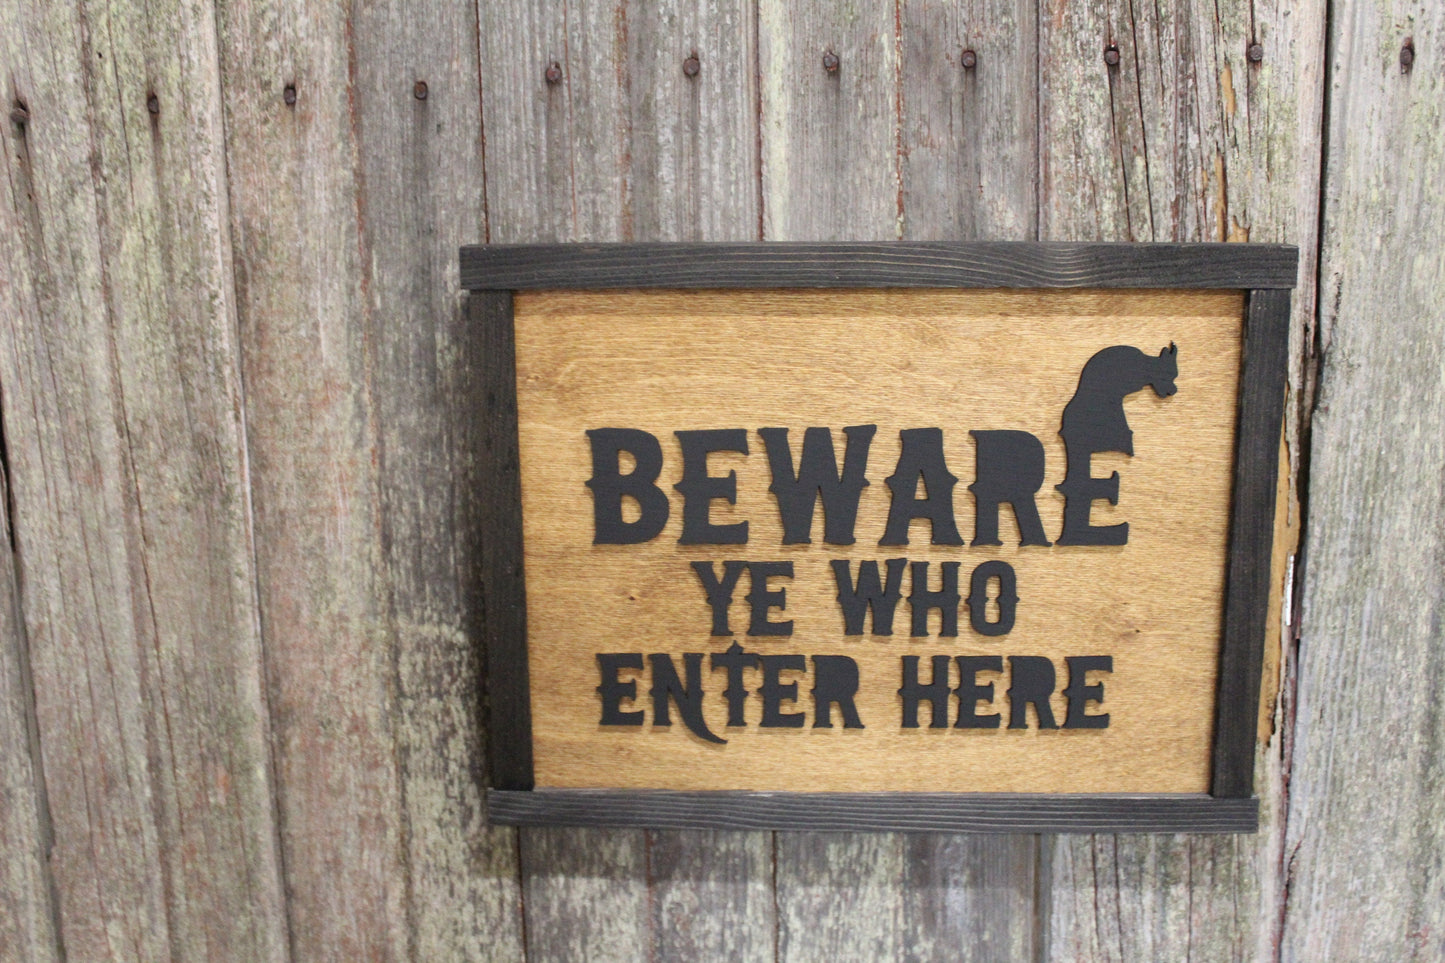 Gargoyle Beware Ye Who Enter Here Wood Sign 3D Raised Text Halloween Fall Brown Black Scary Warning Primitive Wall Hanging Decoration Decor